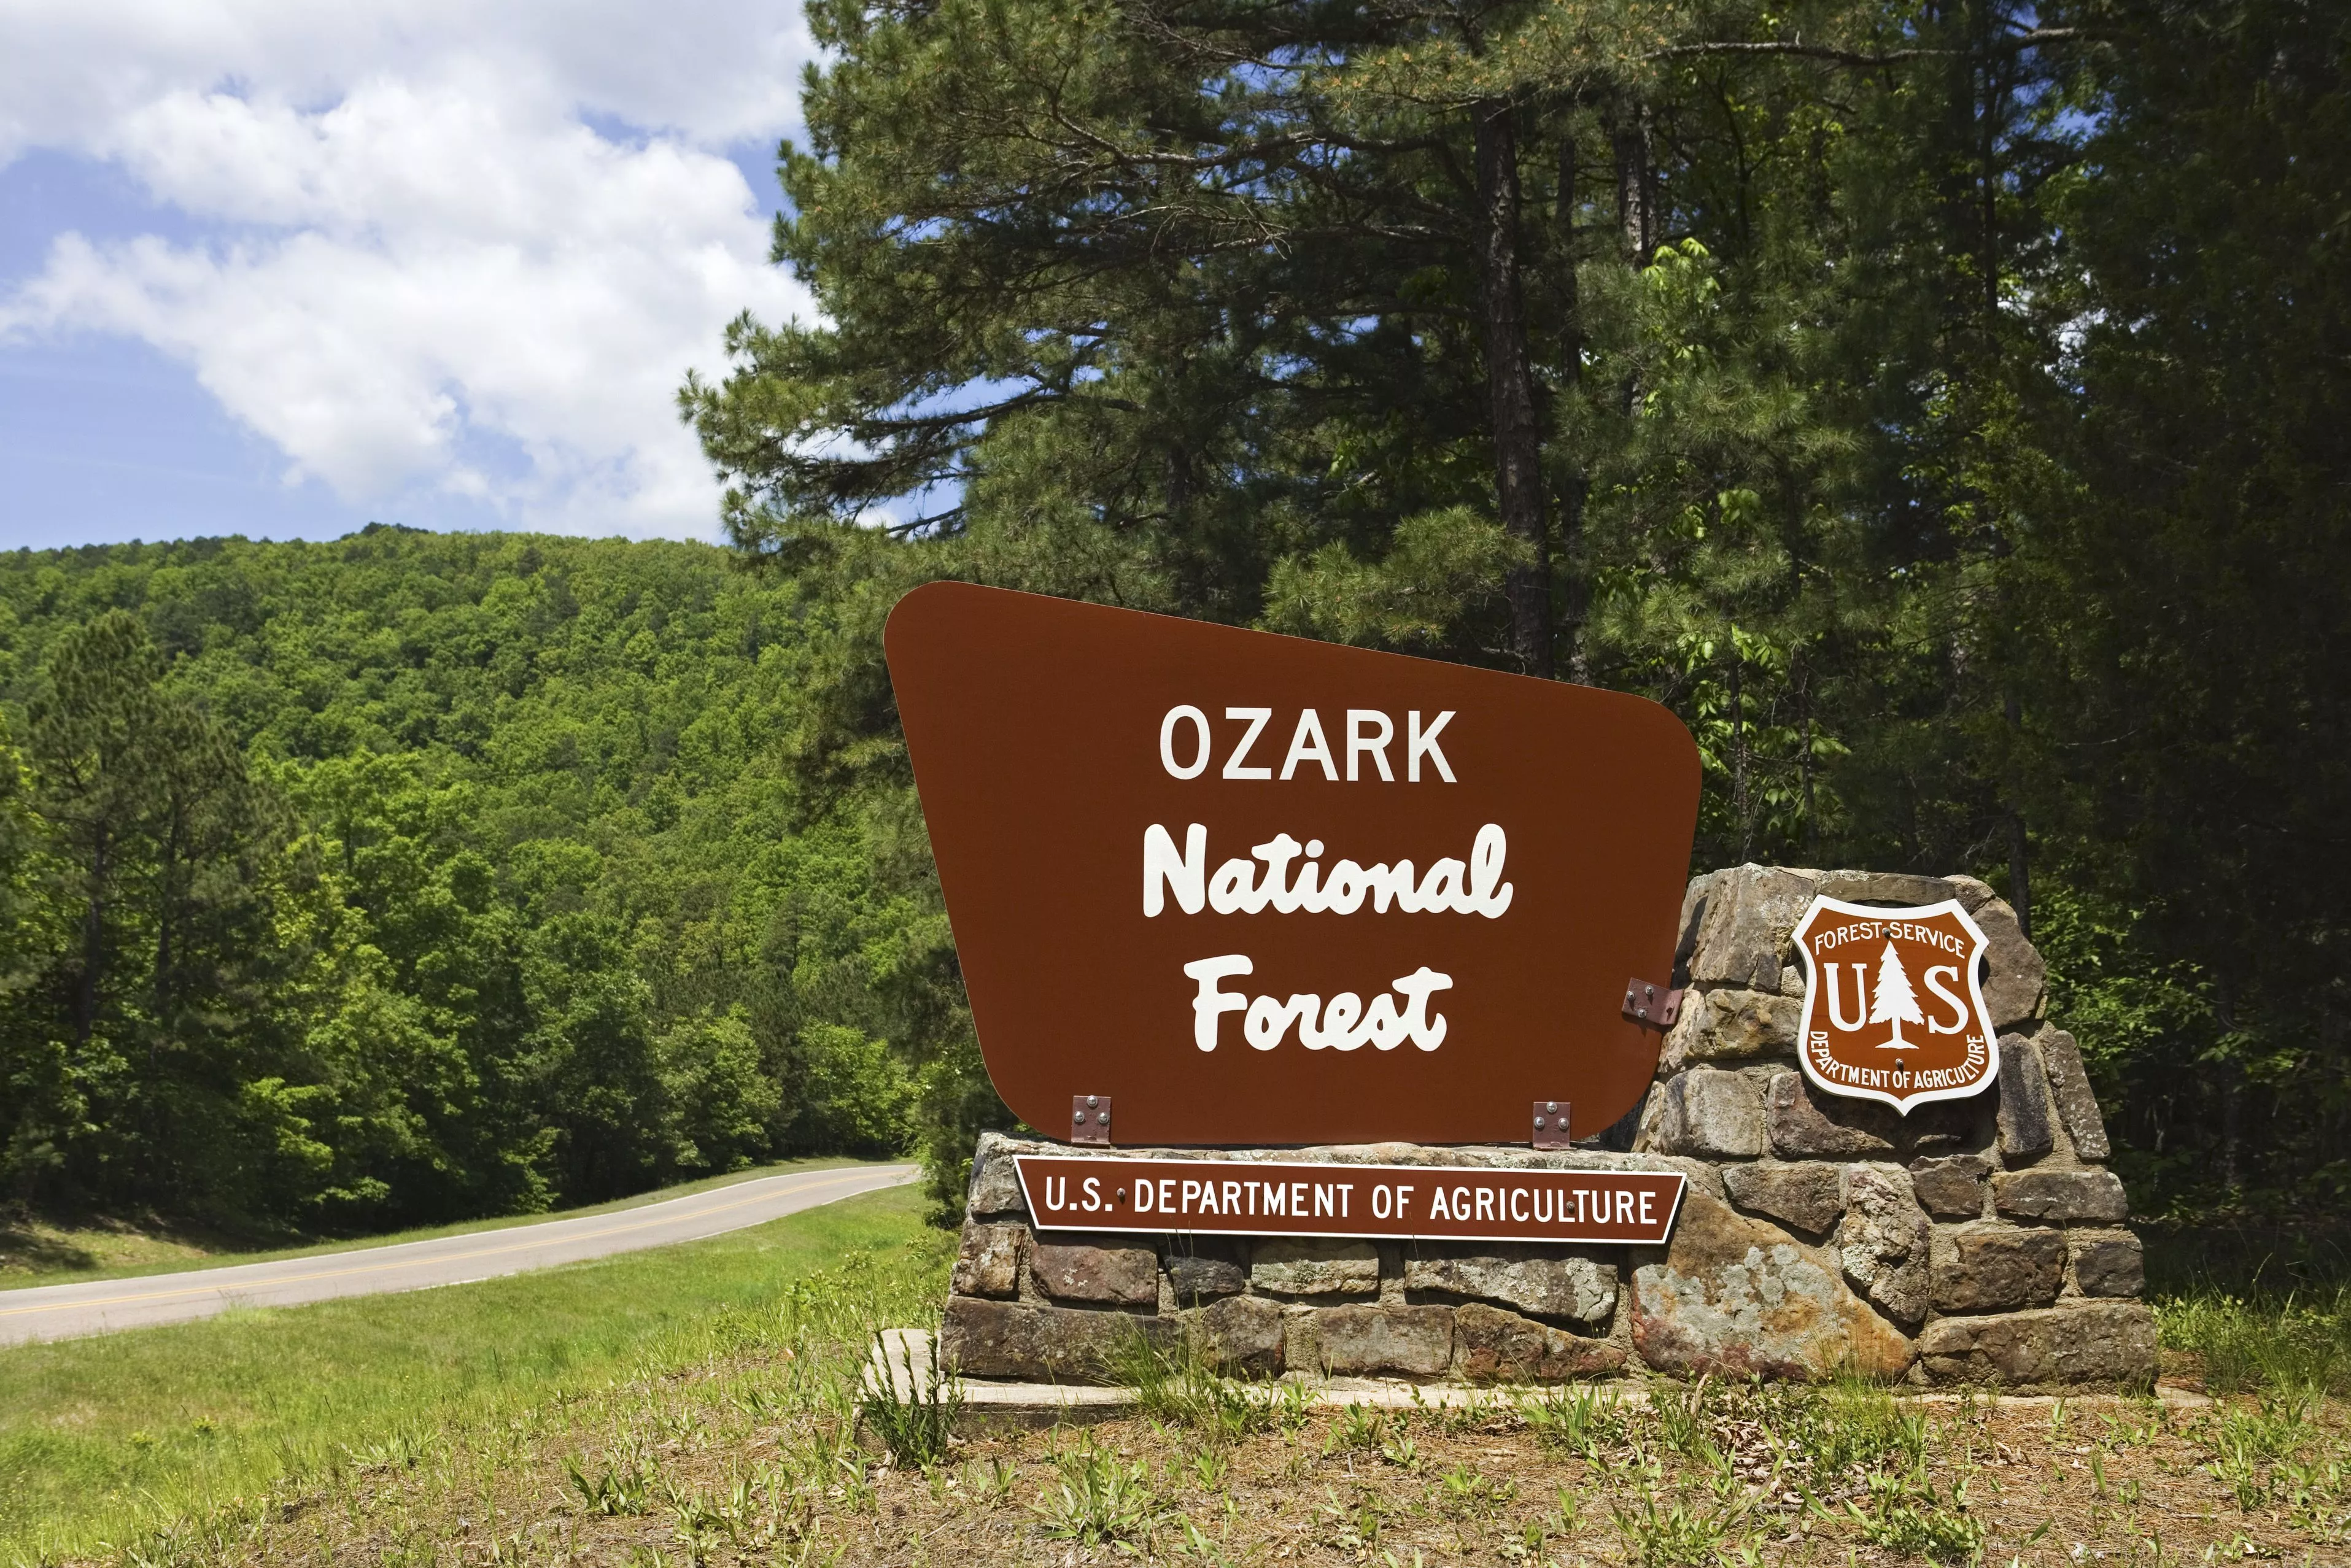 Ozark National Forest in USA, North America | Nature Reserves,Motorcycles - Rated 7.4